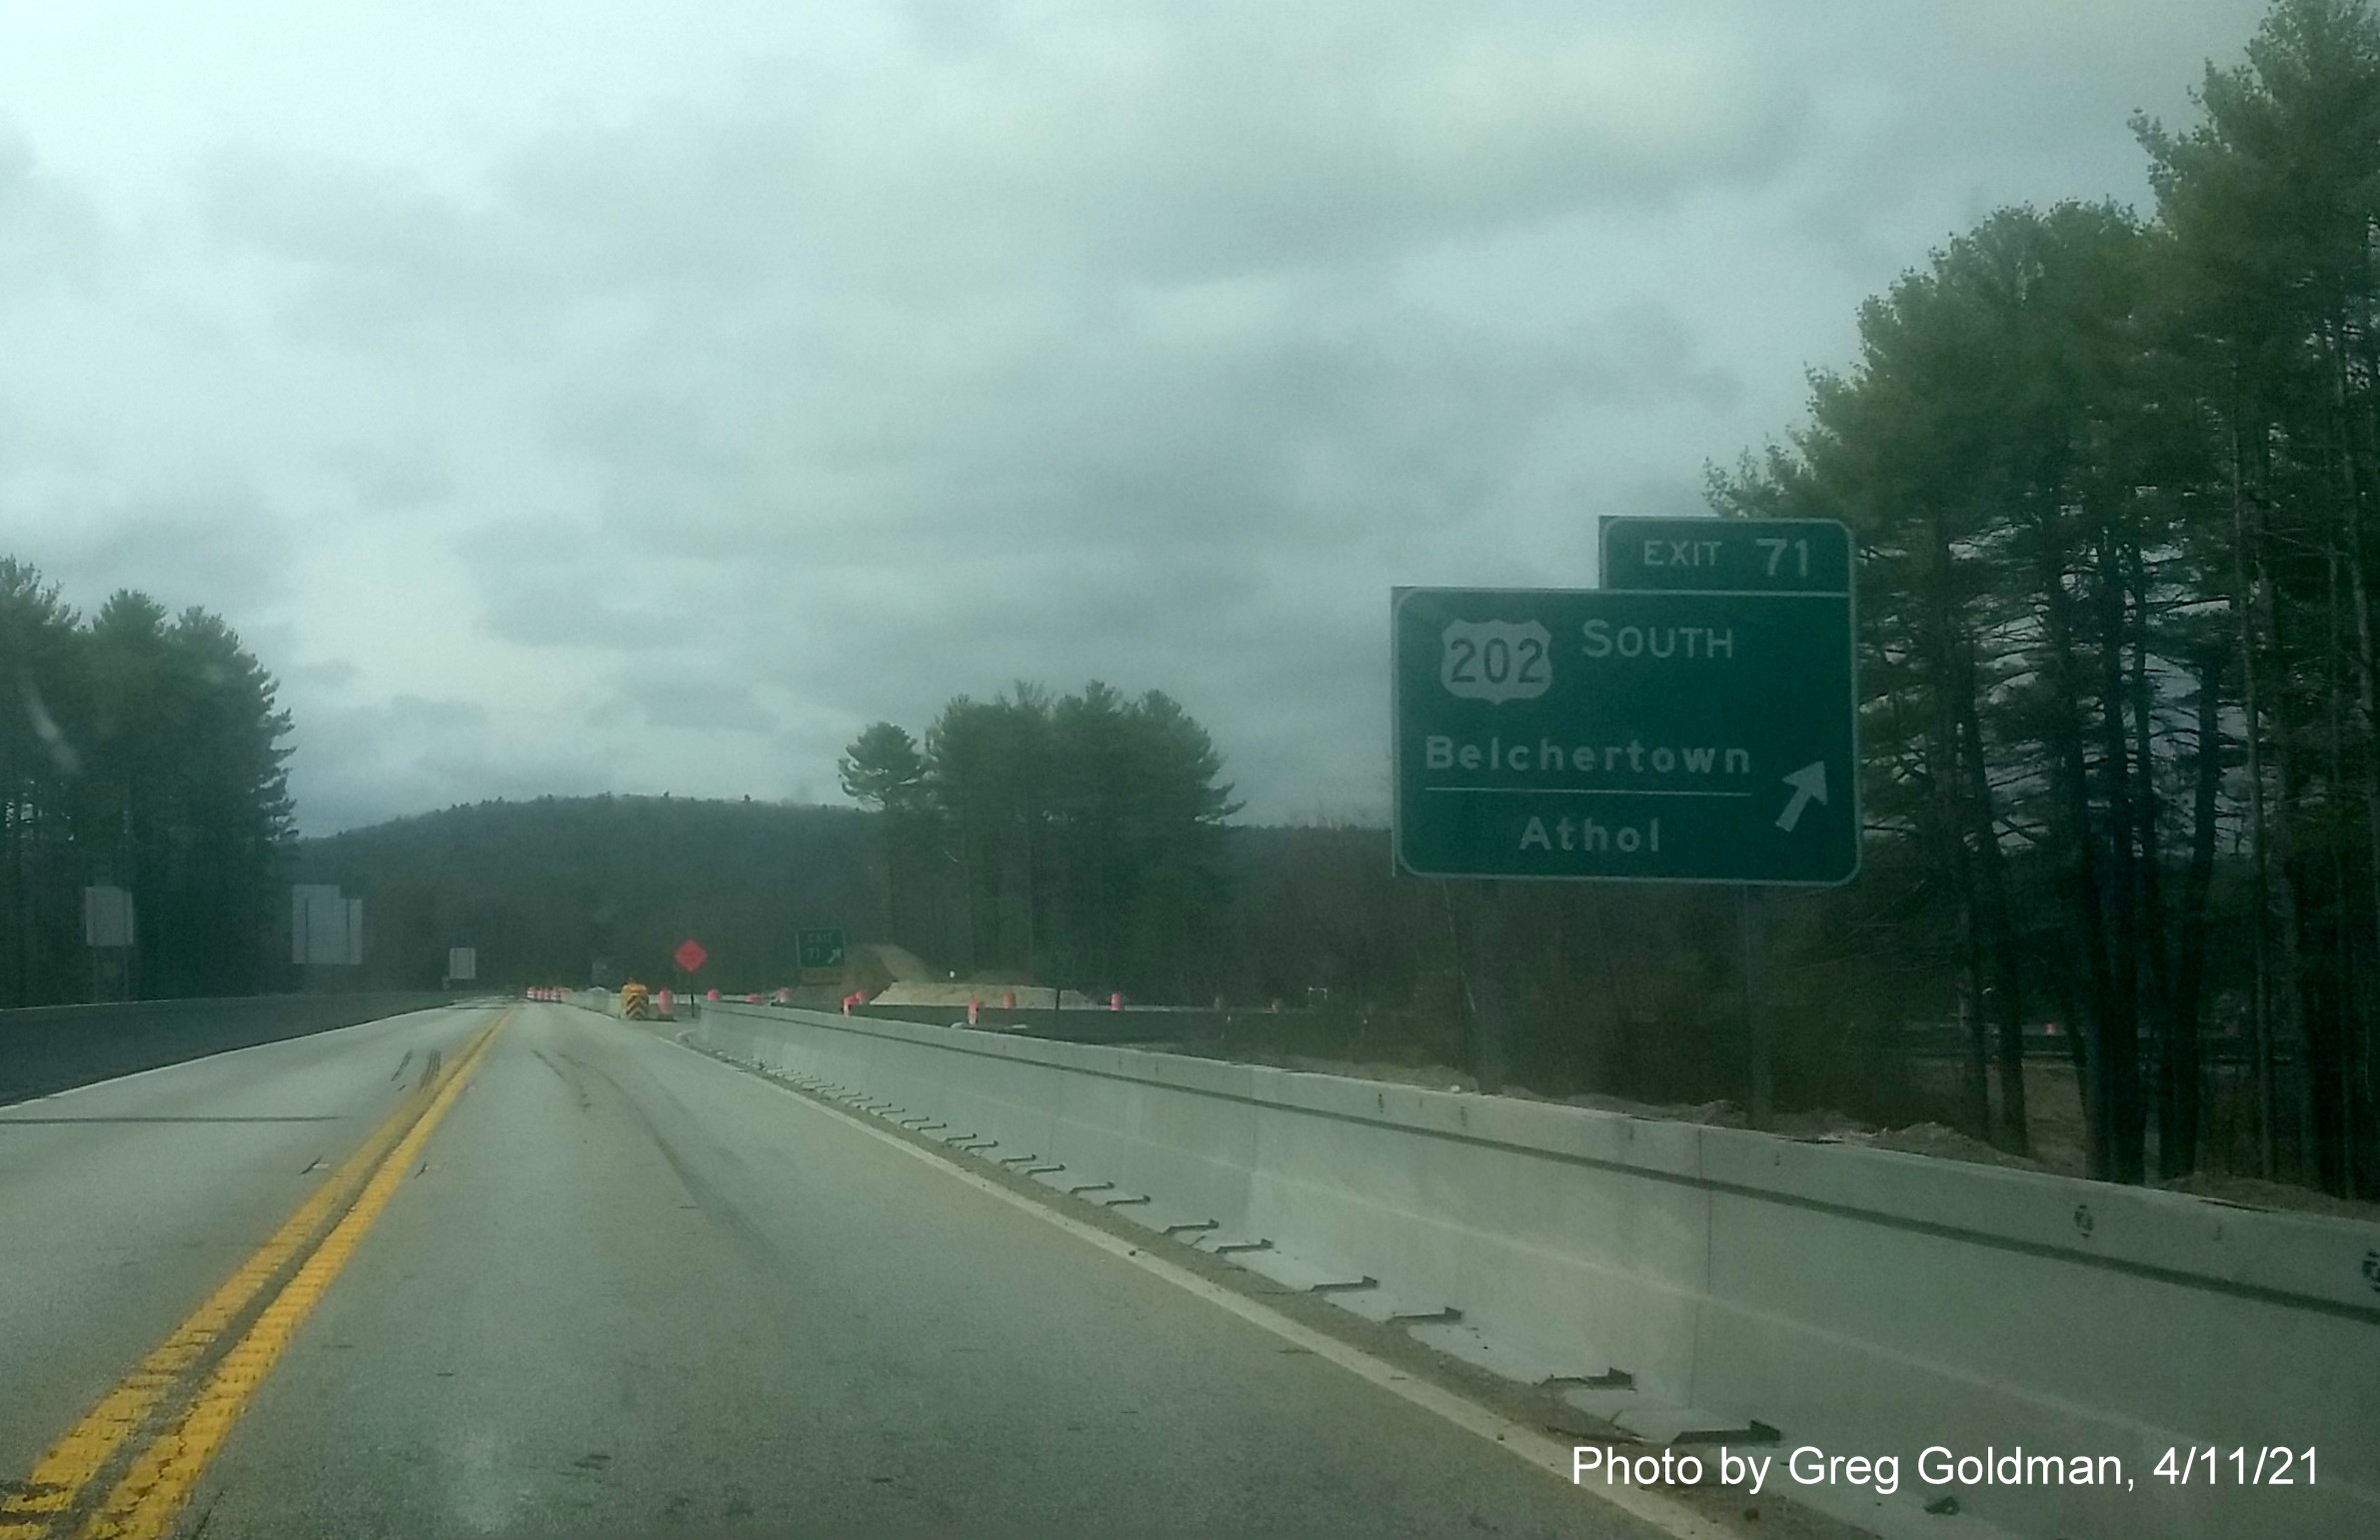 Image of ramp sign for US 202 South exit with new milepost based exit number on MA 2 West in Athol, by Greg Goldman, April 2021